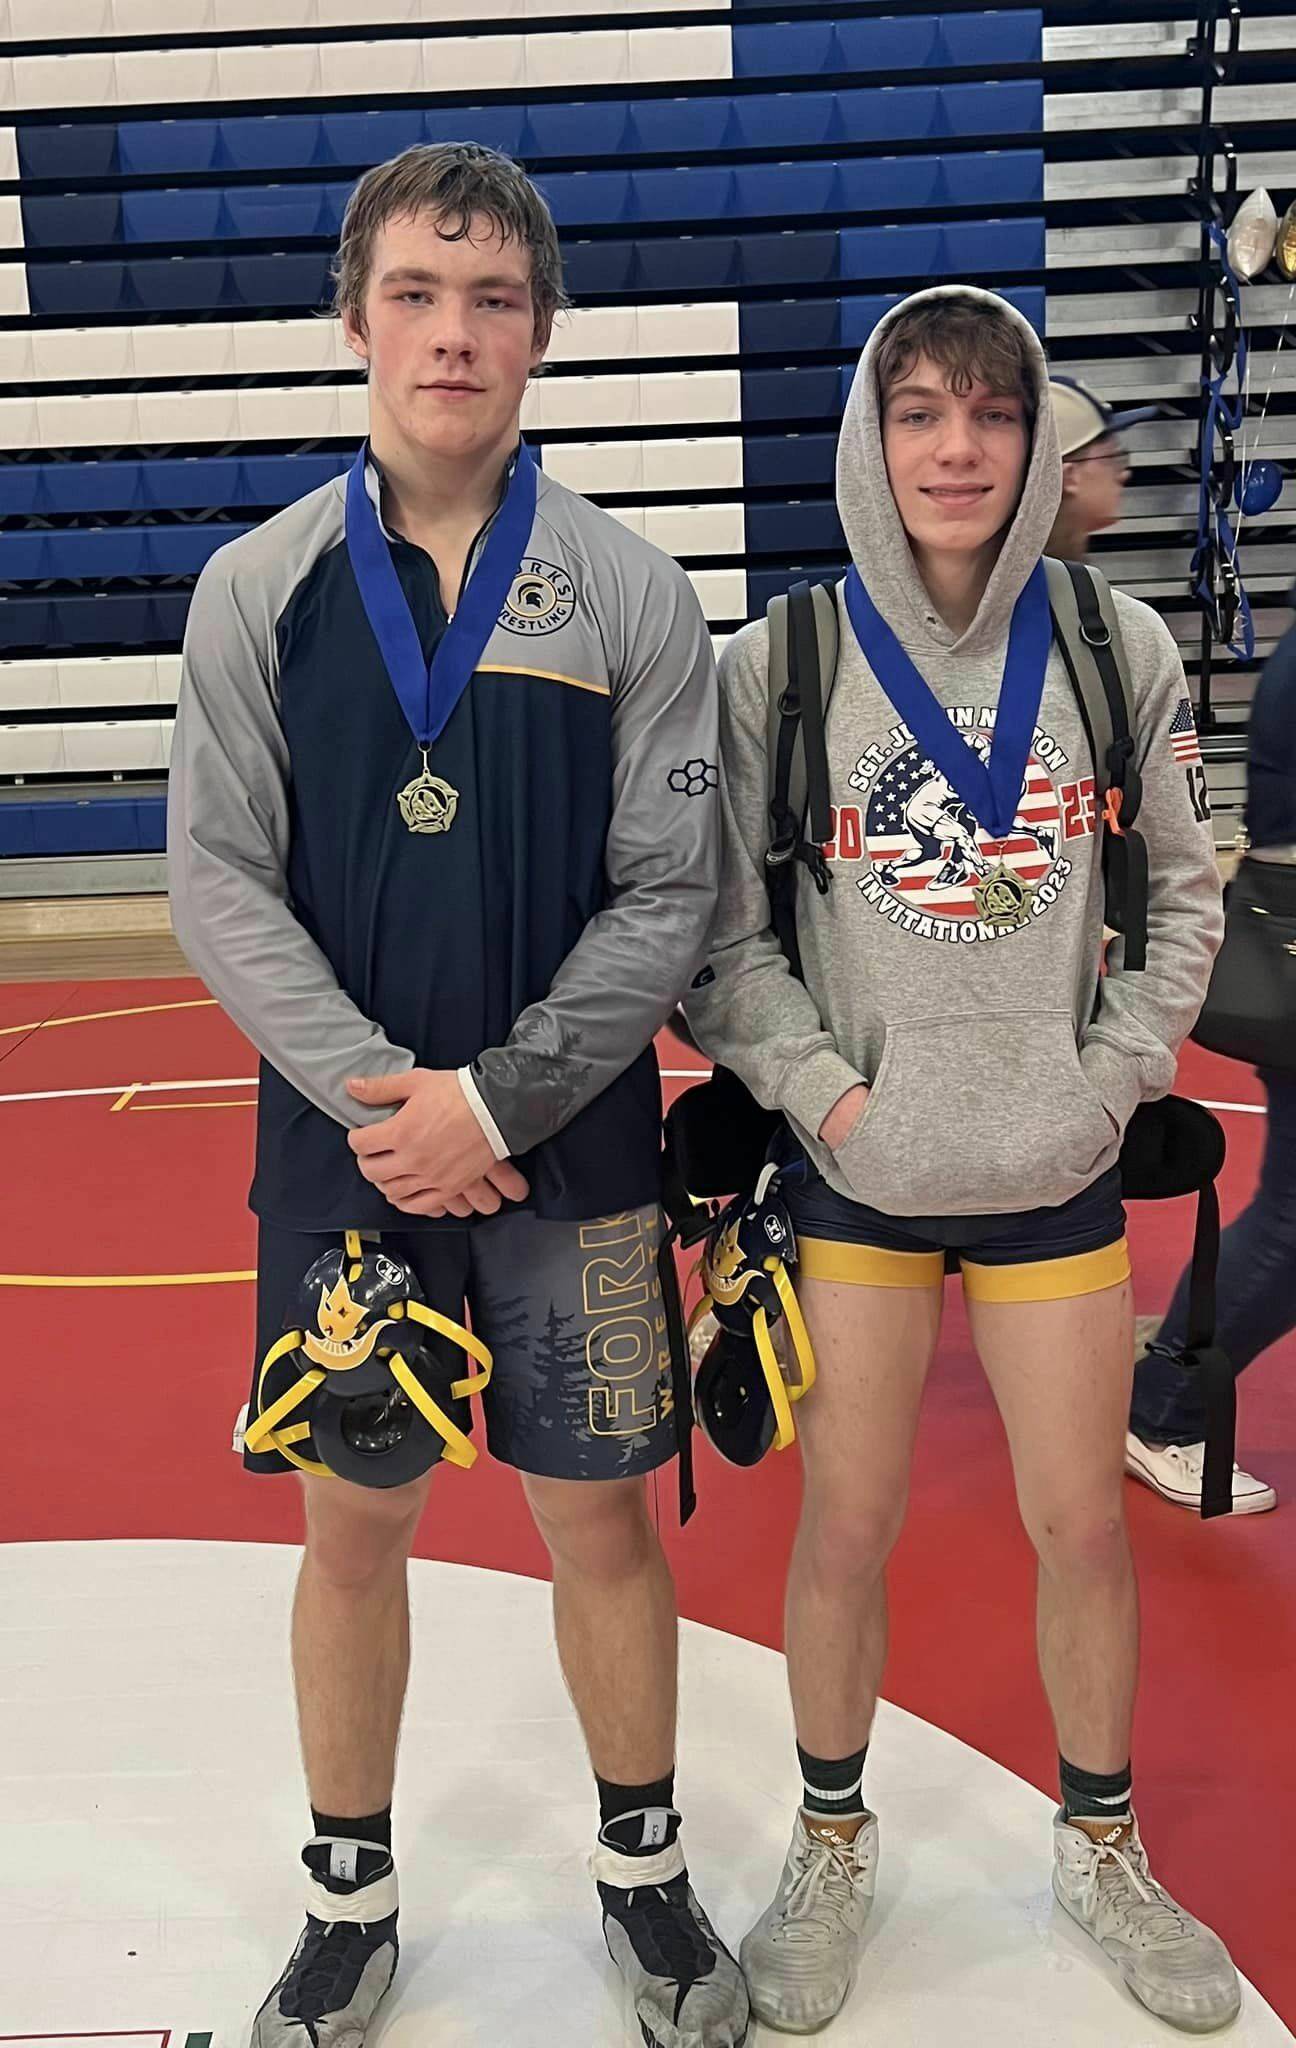 Nate Dahlgren at 182 pounds and Conner Demorest at 126 pounds won their weight divisions. Submitted photo